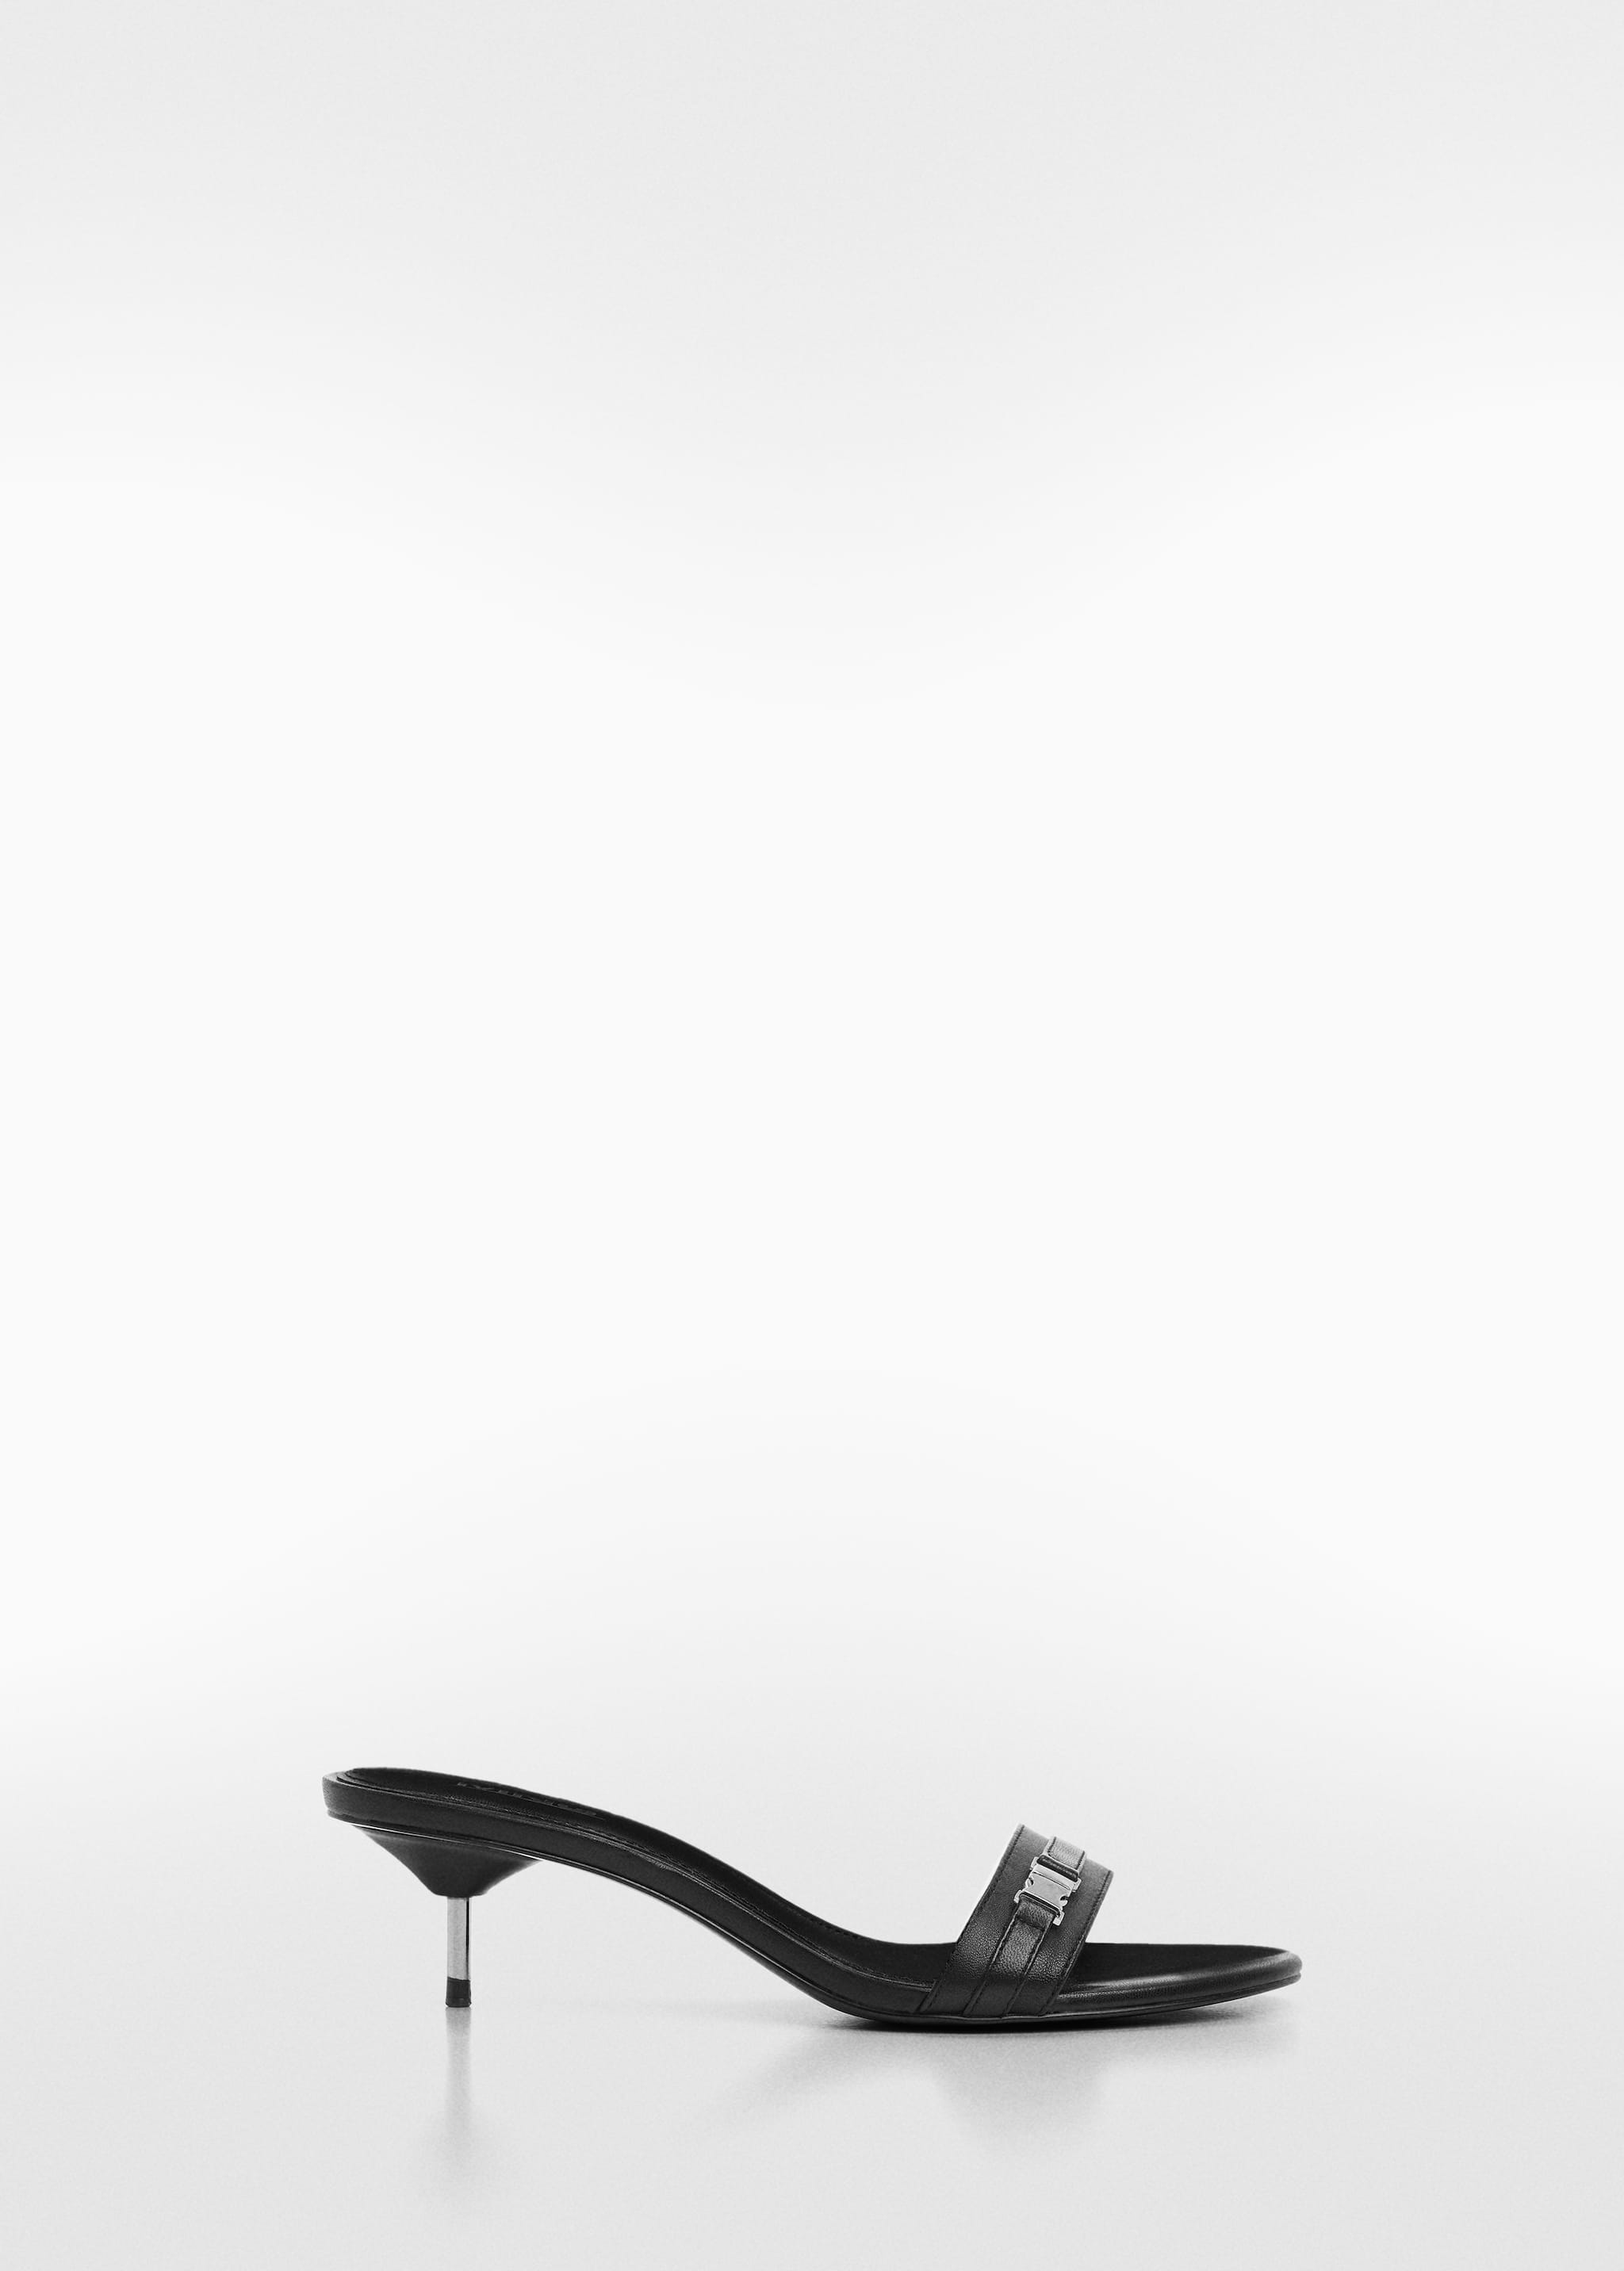 Leather sandals with metallic heel - Article without model